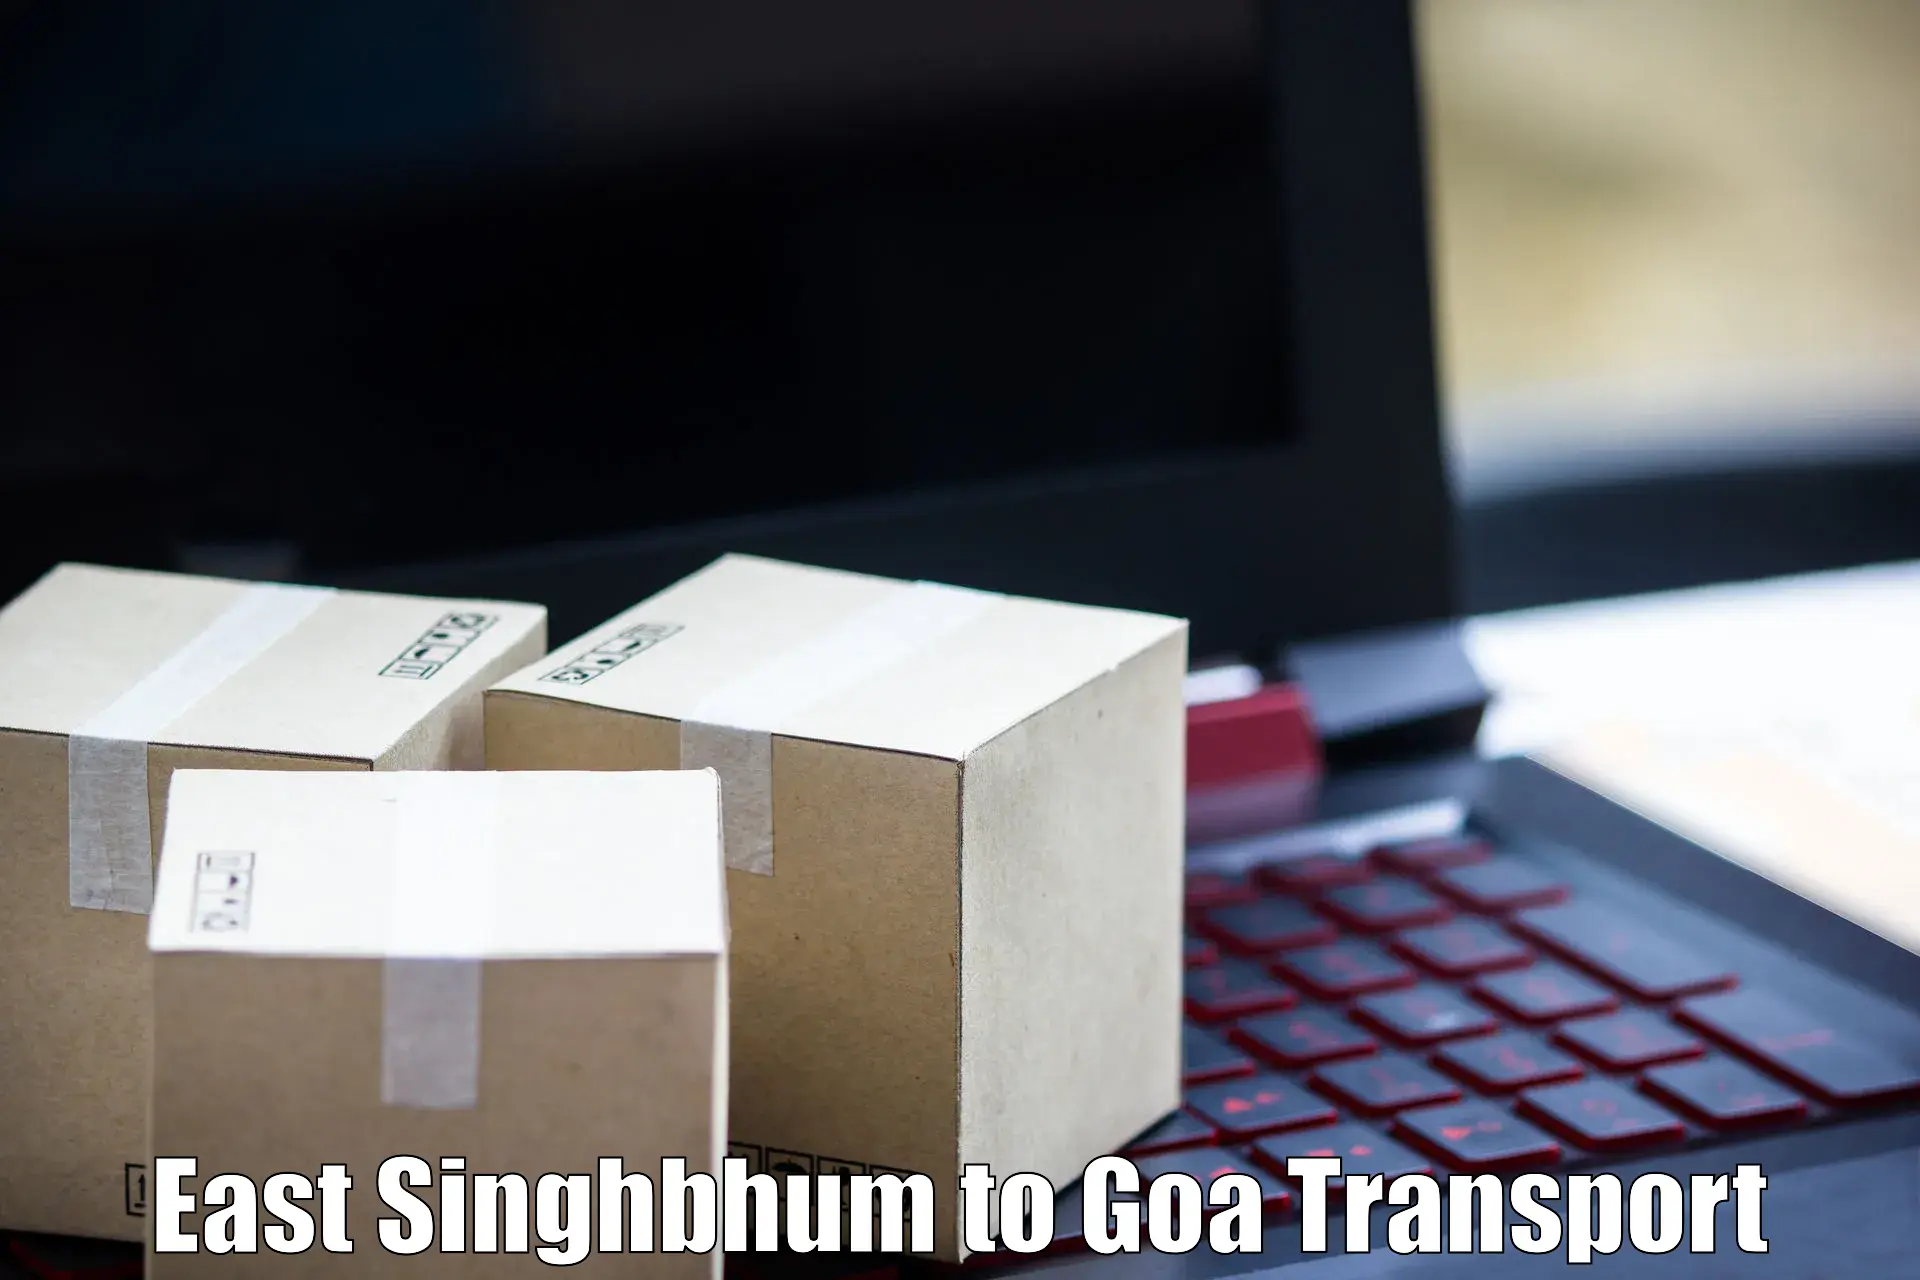 Package delivery services East Singhbhum to Panaji